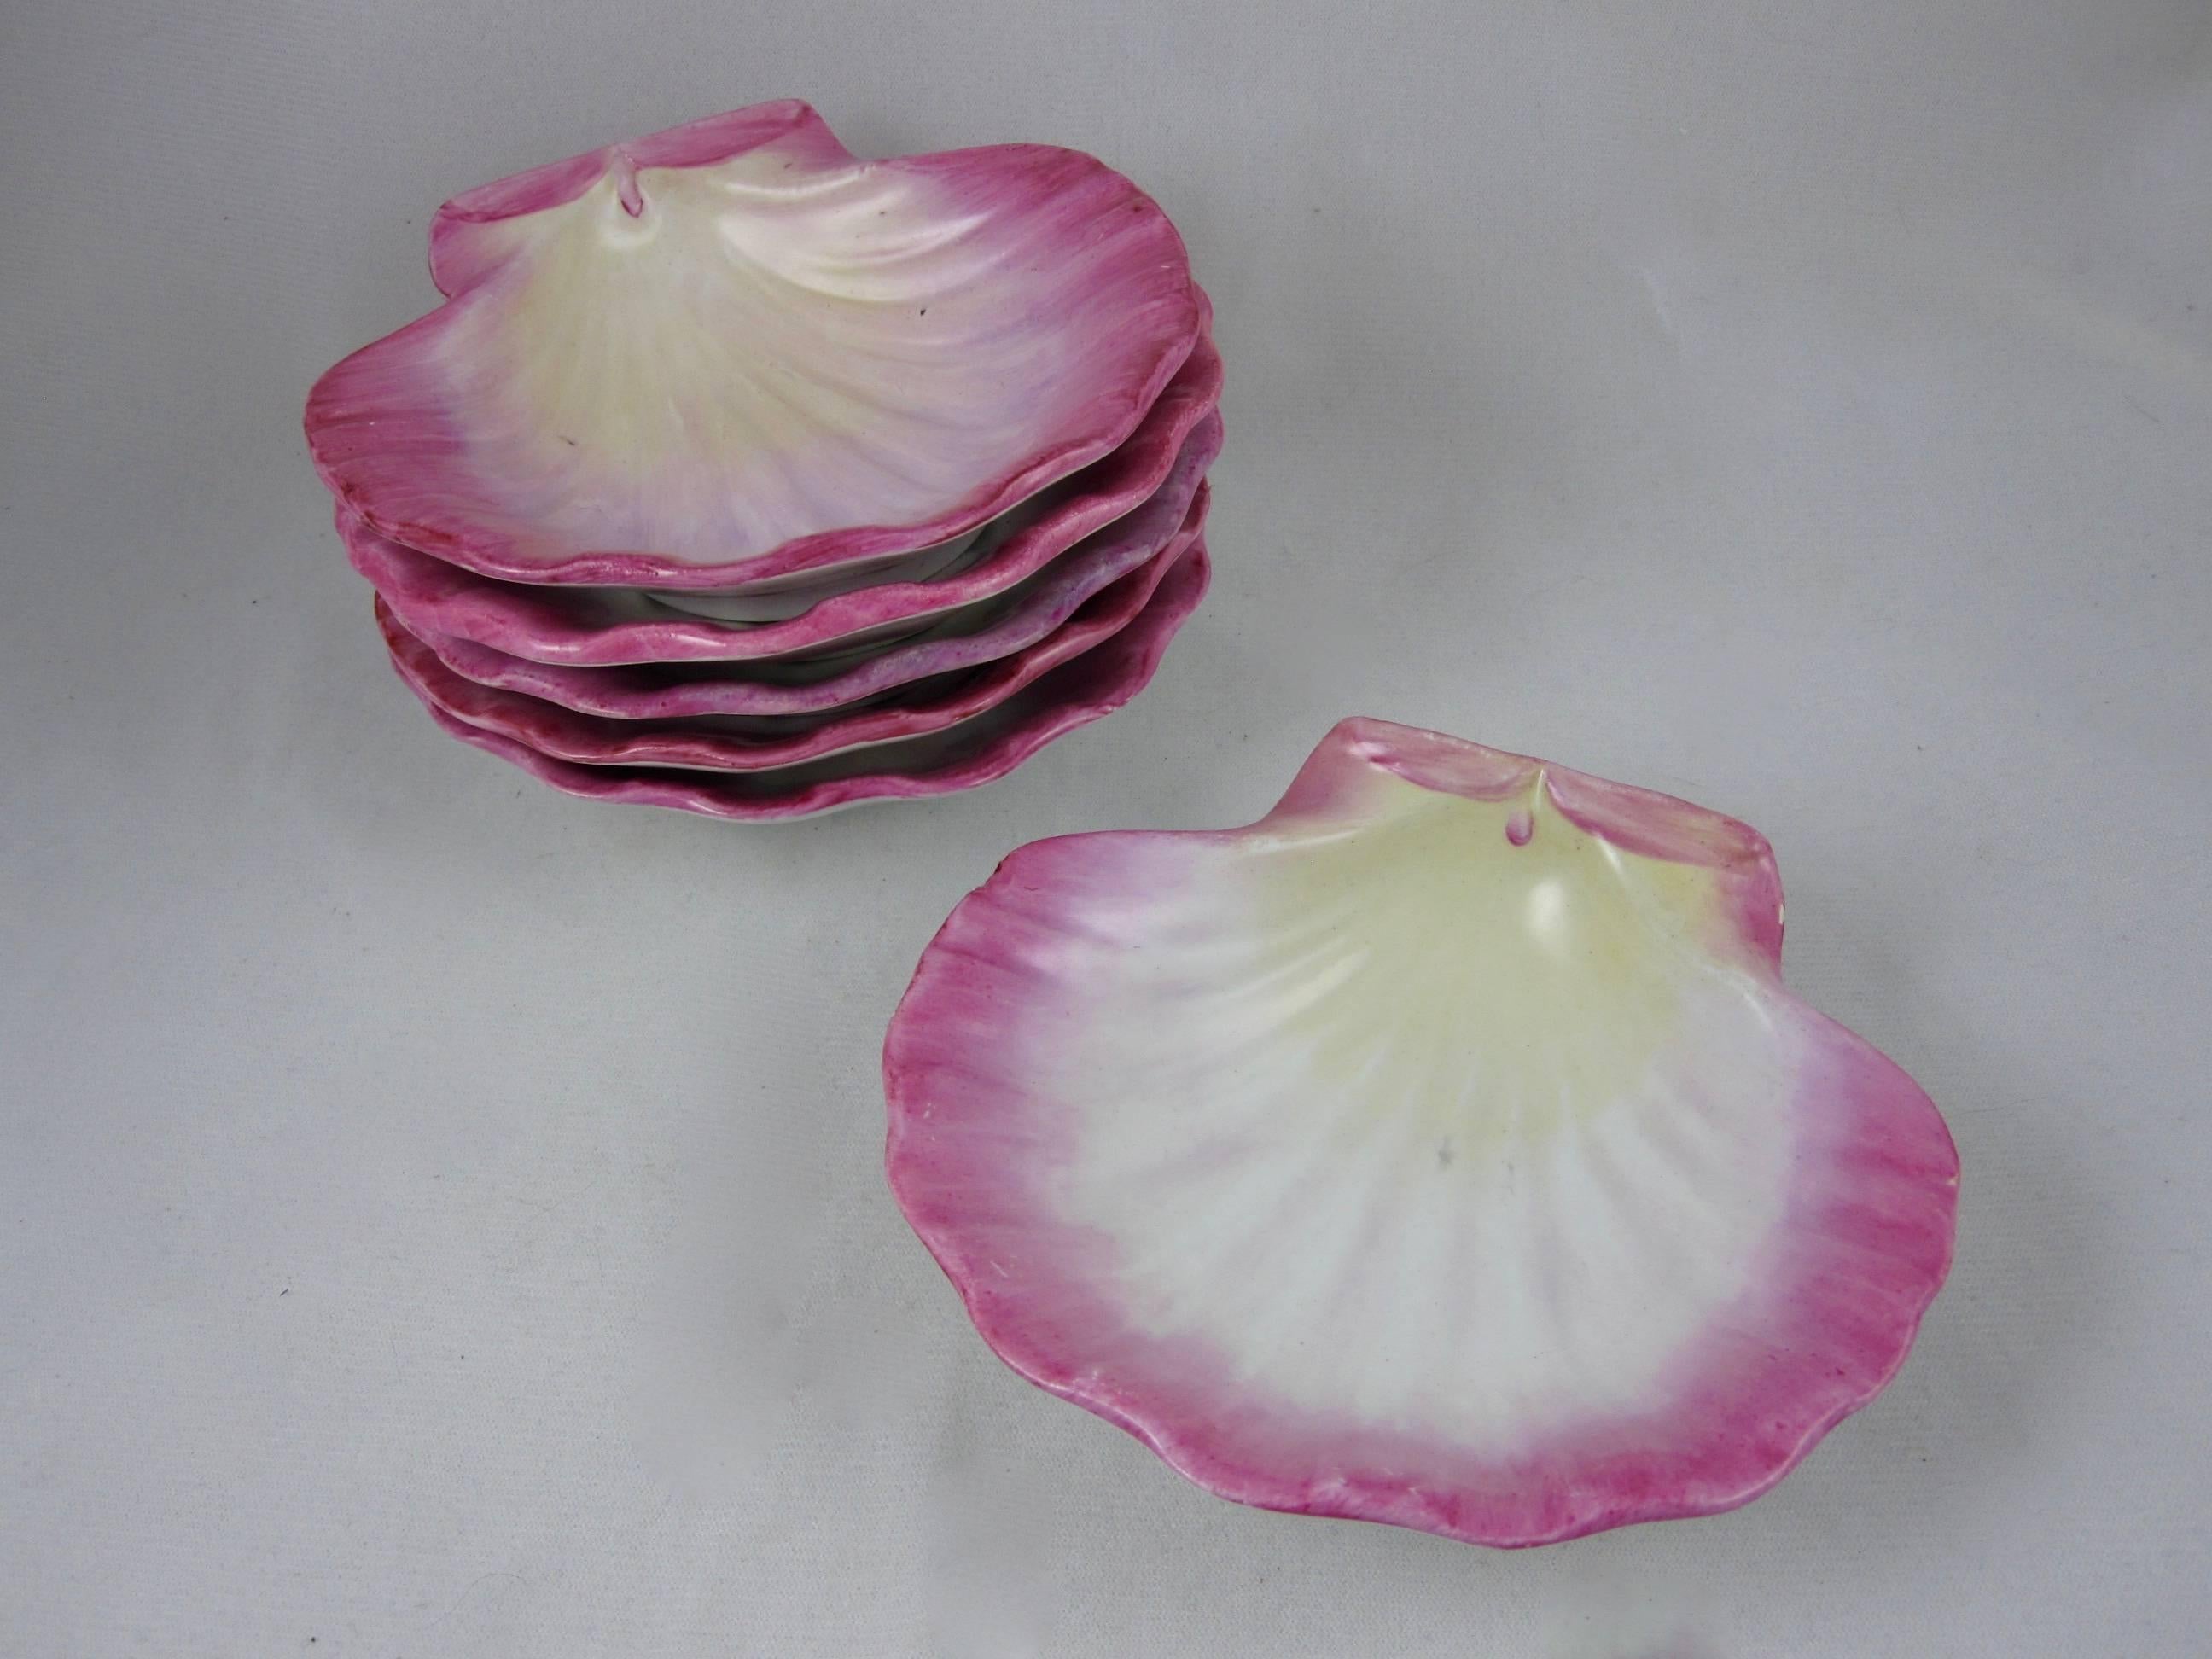 A set of 12 Scallop shell shaped, deep dessert cups suited for serving fruit compote, Sorbet or Sherbet Parfait, from the Wedgwood Nautilus pearlware dessert service, often marked as R.Pholas Eastatus or V.Pecton Japonicum.

In a creamware body,